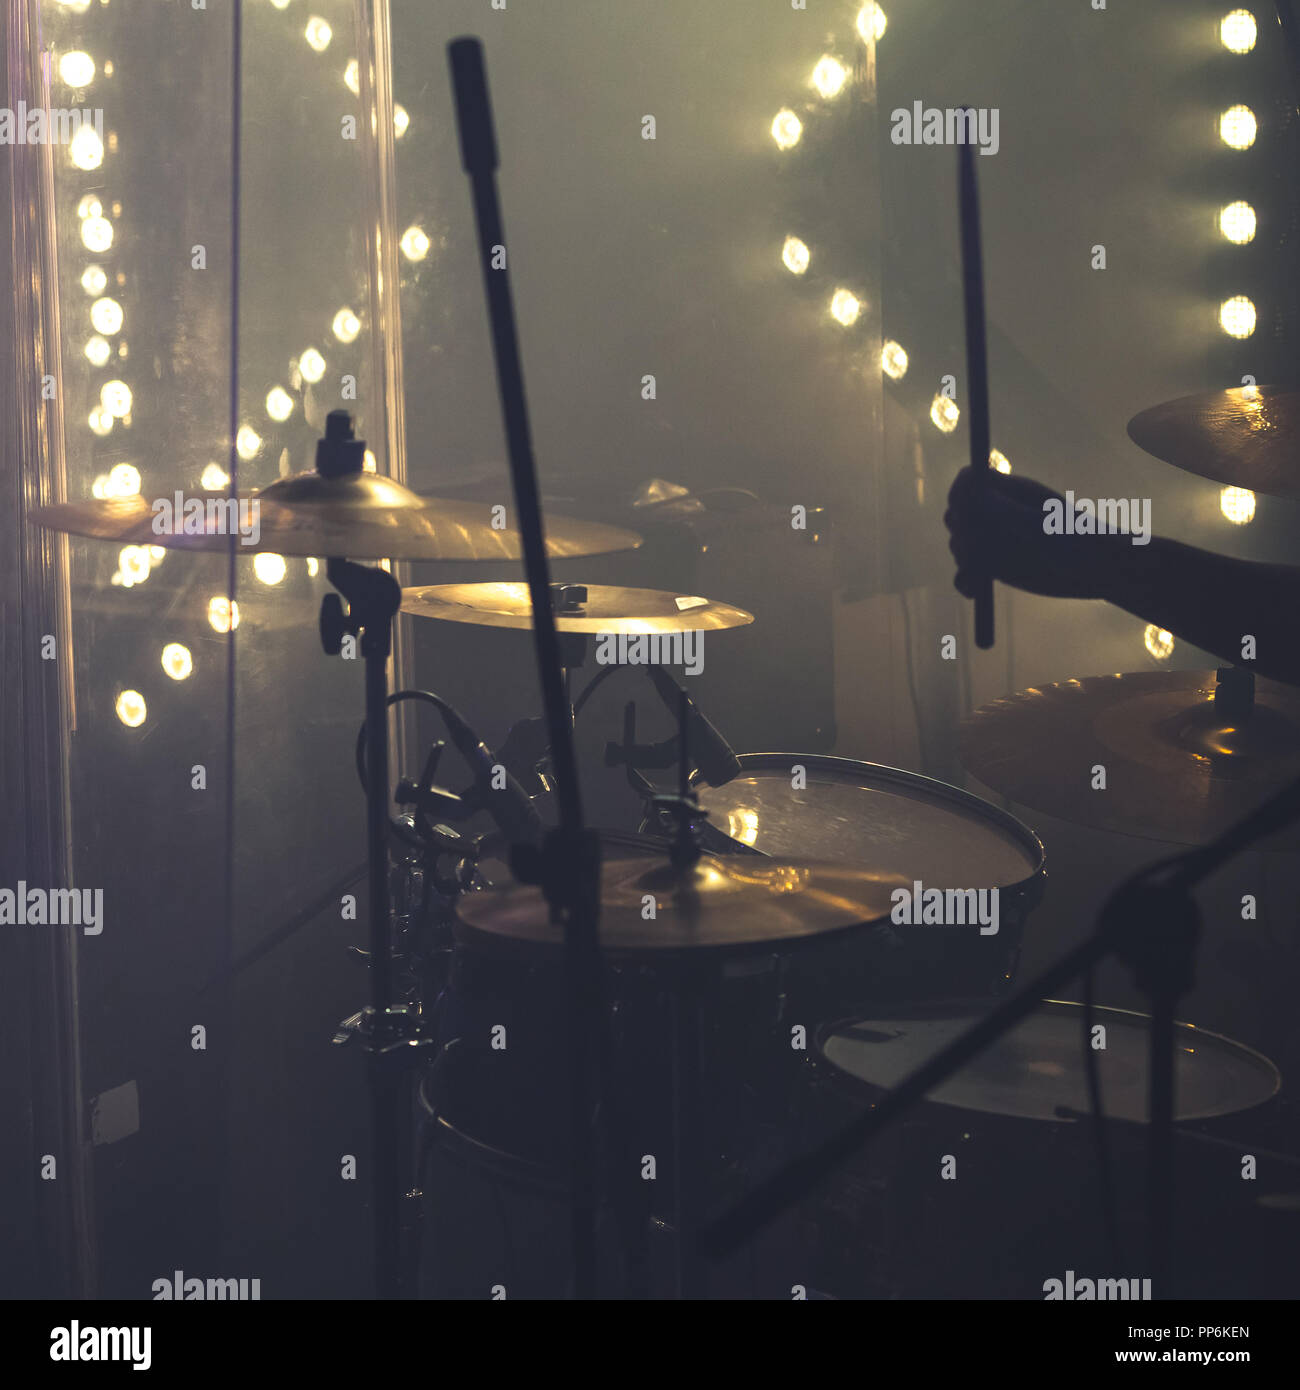 Live rock music background, drum set with cymbals and drummer hand Stock Photo